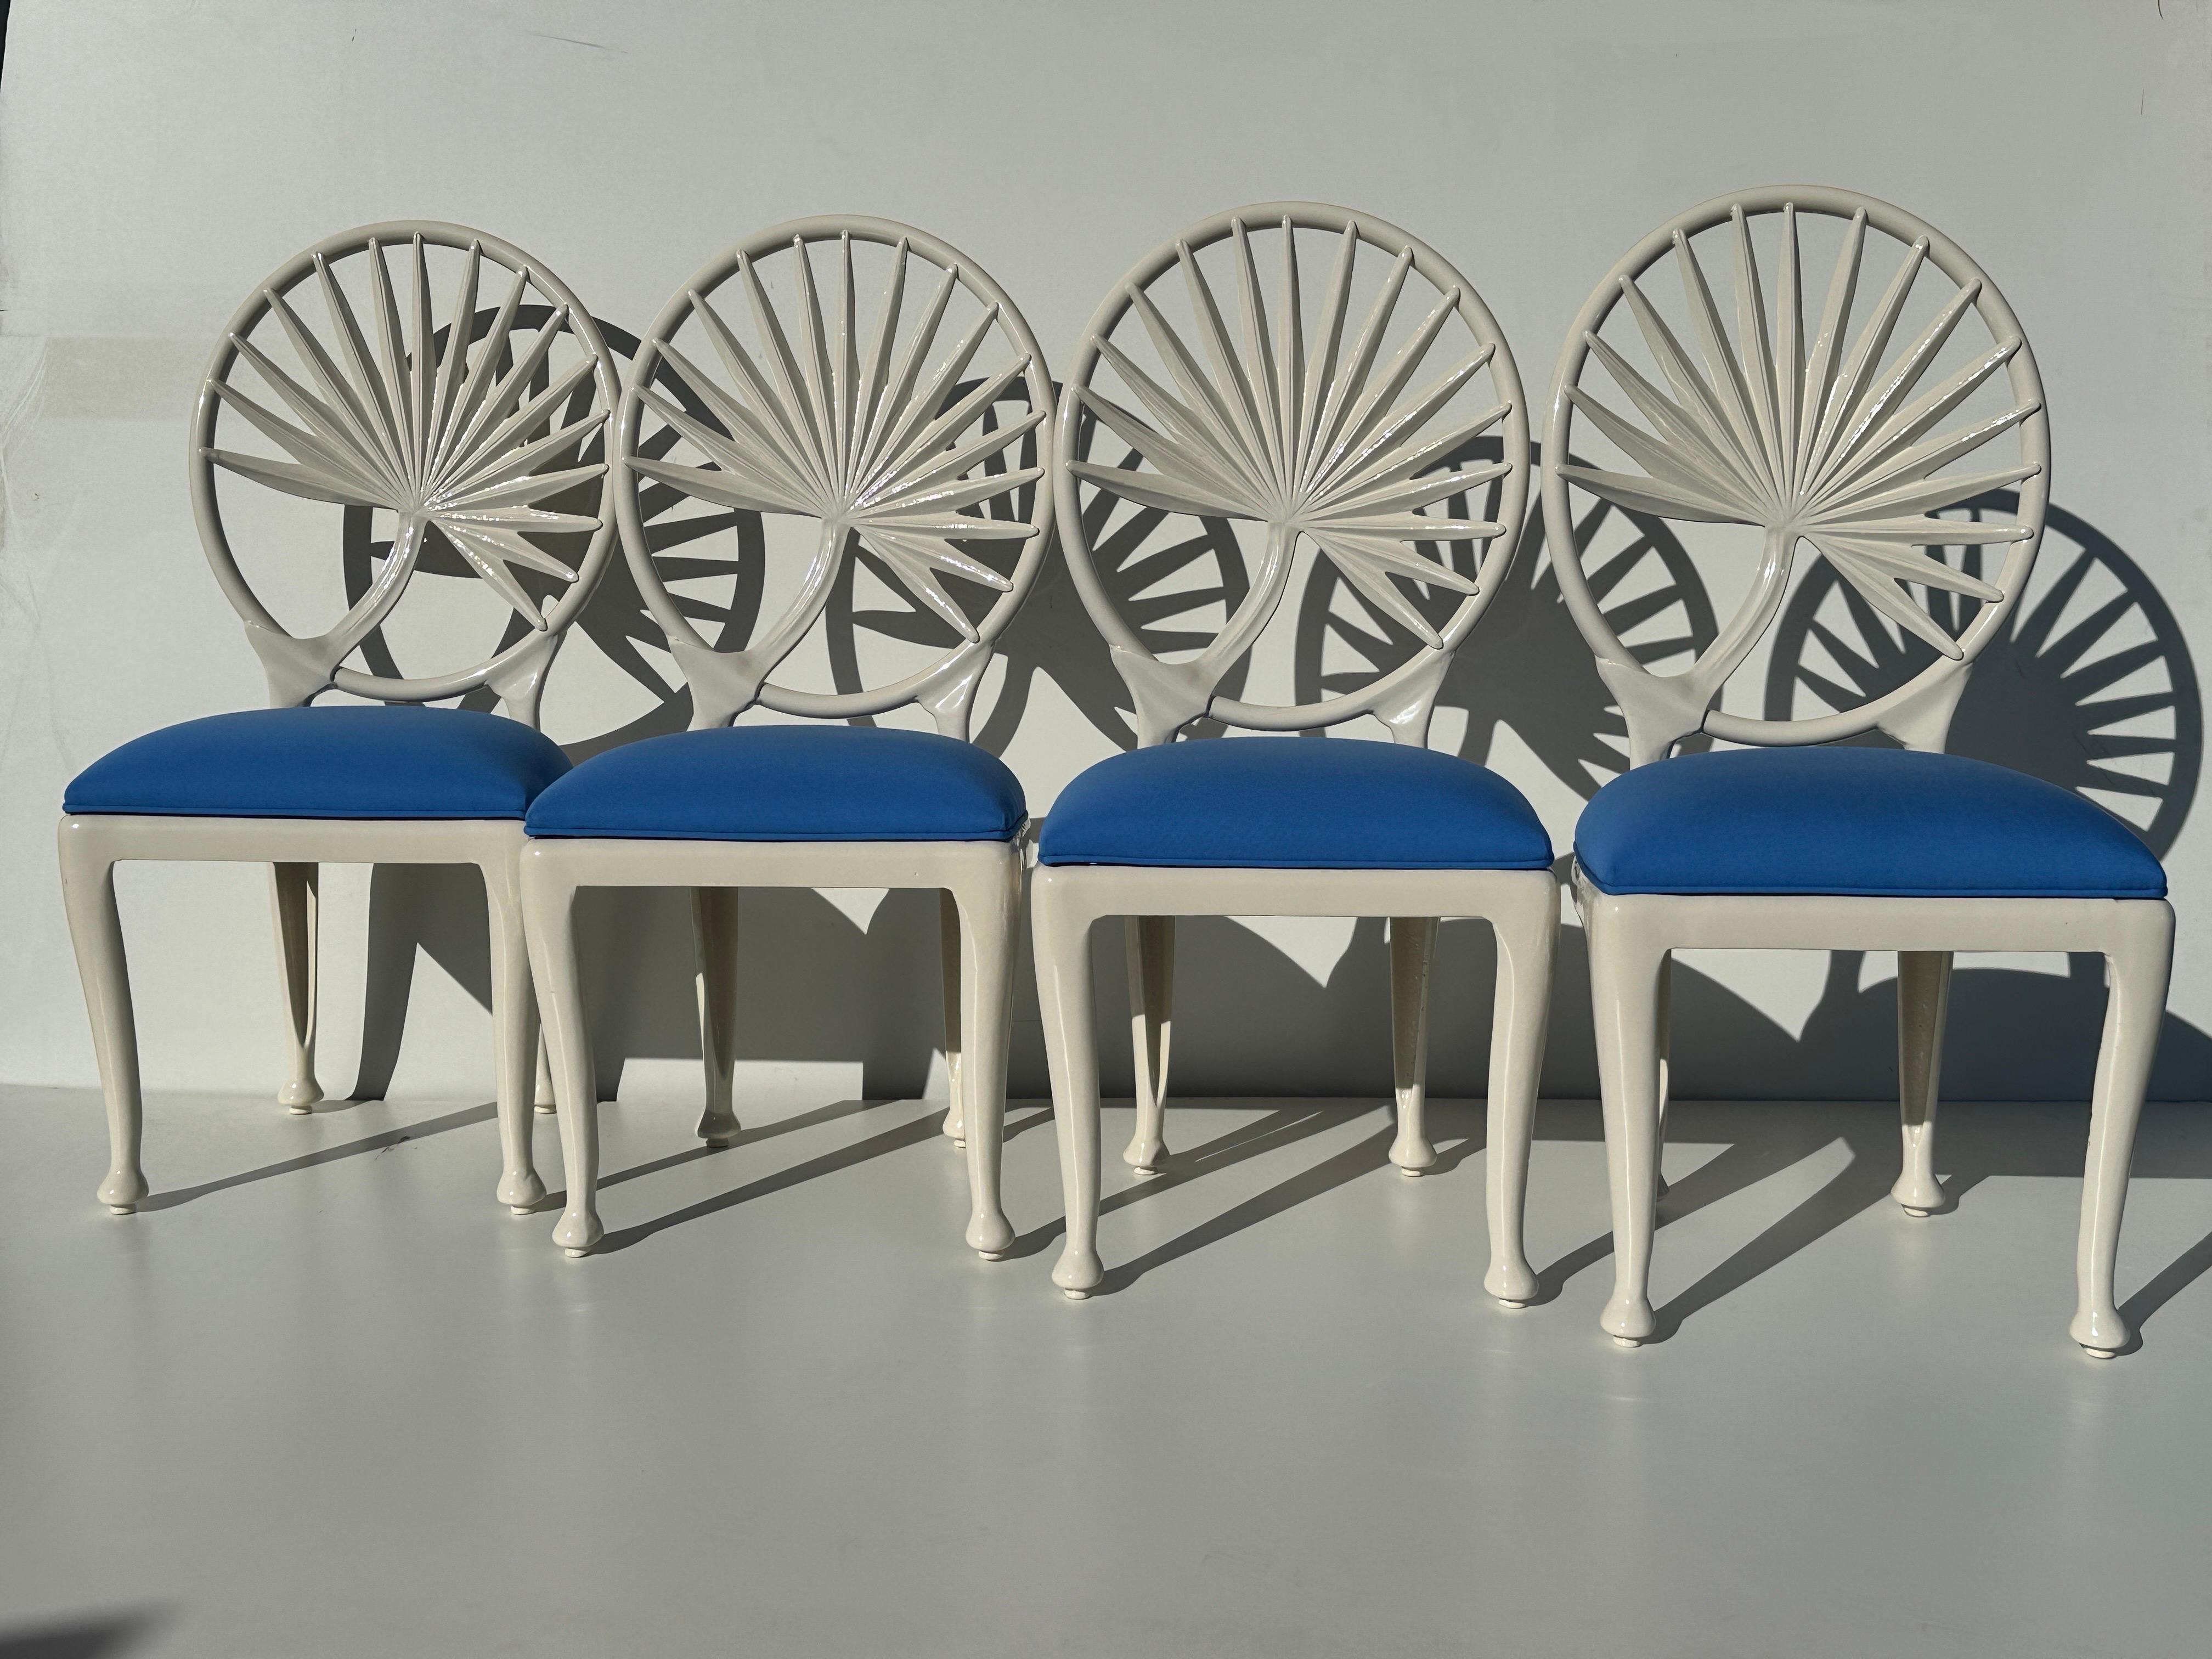 Set of four aluminum outdoor garden chairs in light cream powder coated finish with palm leaf design. Seats are upholstered in blue outdoor fabric which is resistant to water and can be easily reupholstered to suit your design theme and color.